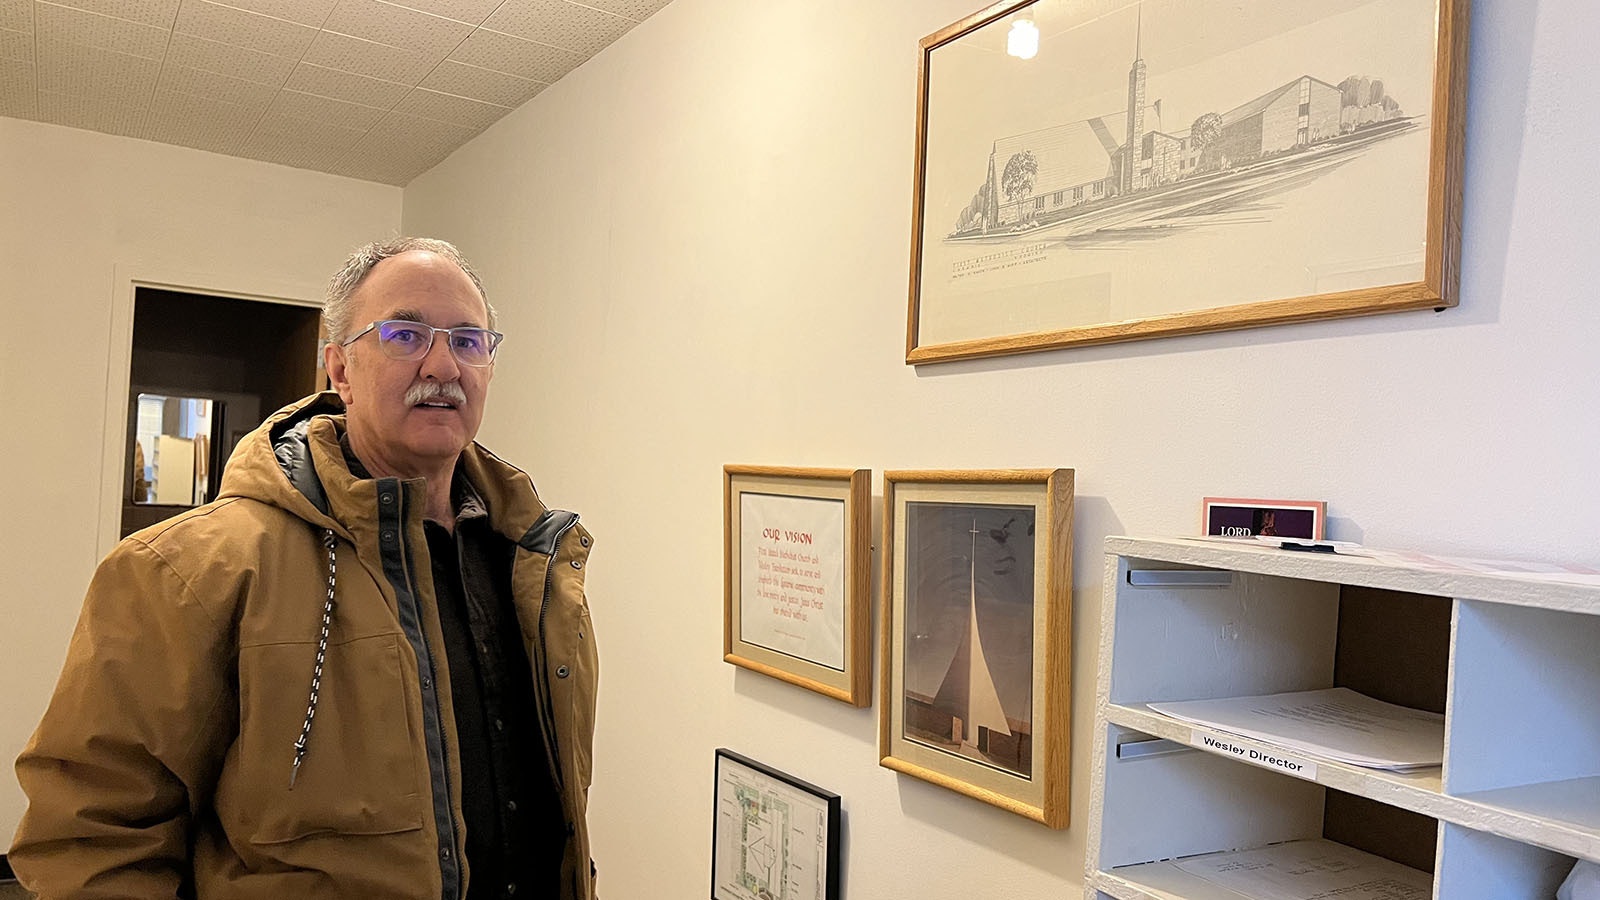 Pastor Eric Feuerstein of the First United Methodist Church in Laramie stands next to a drawing of the original, much more subtle design for the church’s iconic sanctuary.